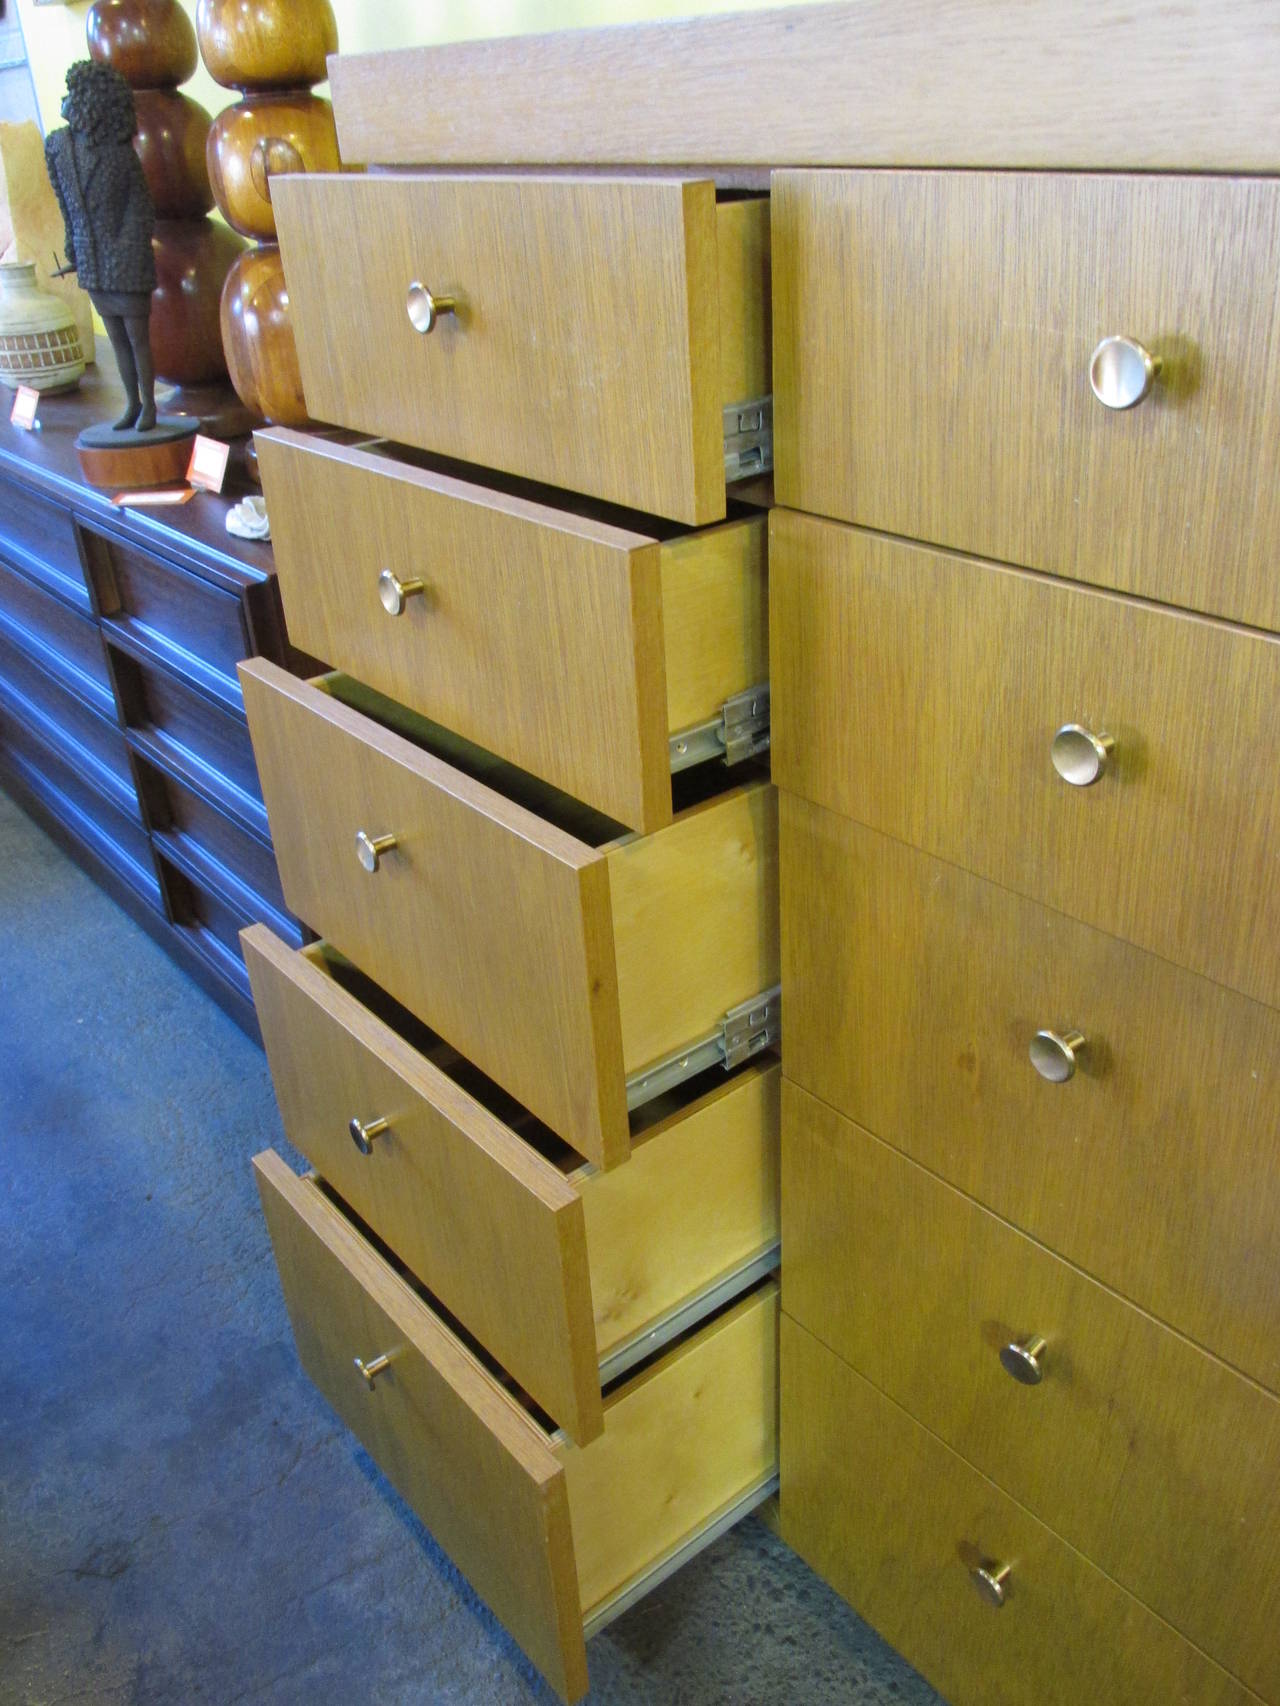 A John H. Howe design inspired by Frank Lloyd Wright. A golden mahogany tall ten-drawer dresser. Original hardware and finish. Steel drawer glides offer exceptionally smooth drawer open and close. Originally from the estate of John H. Howe and his